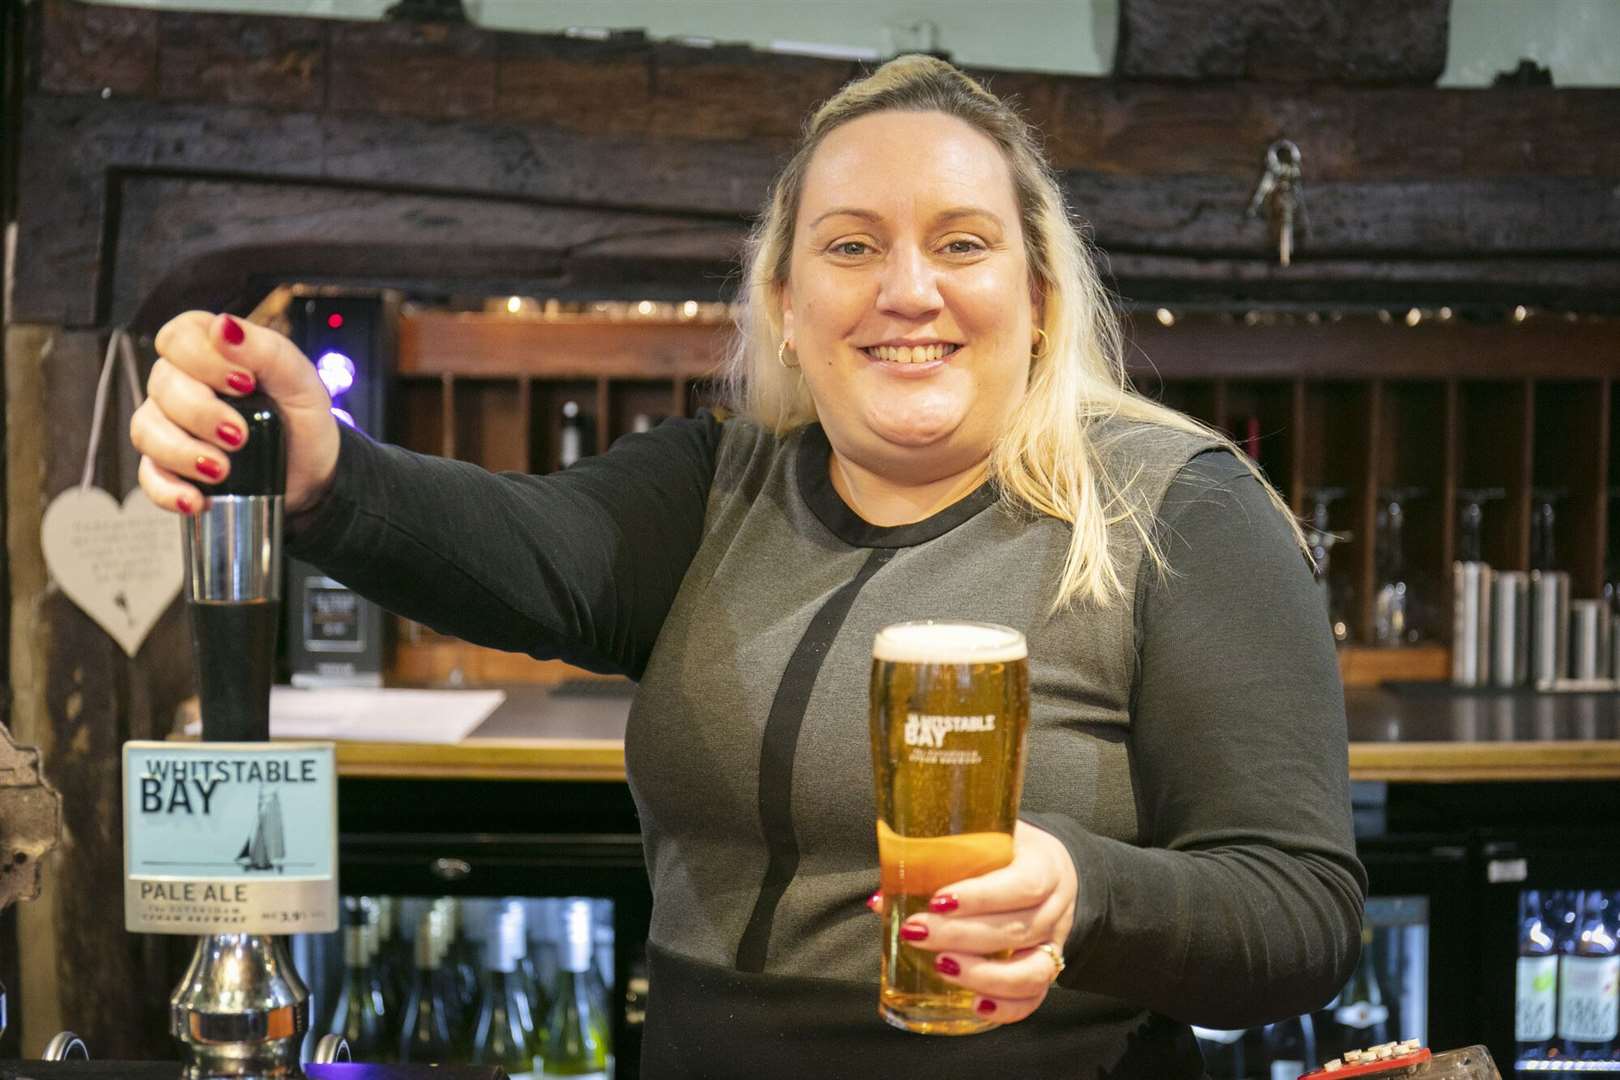 Natalie Alden is the new general manager at The Bull at Linton